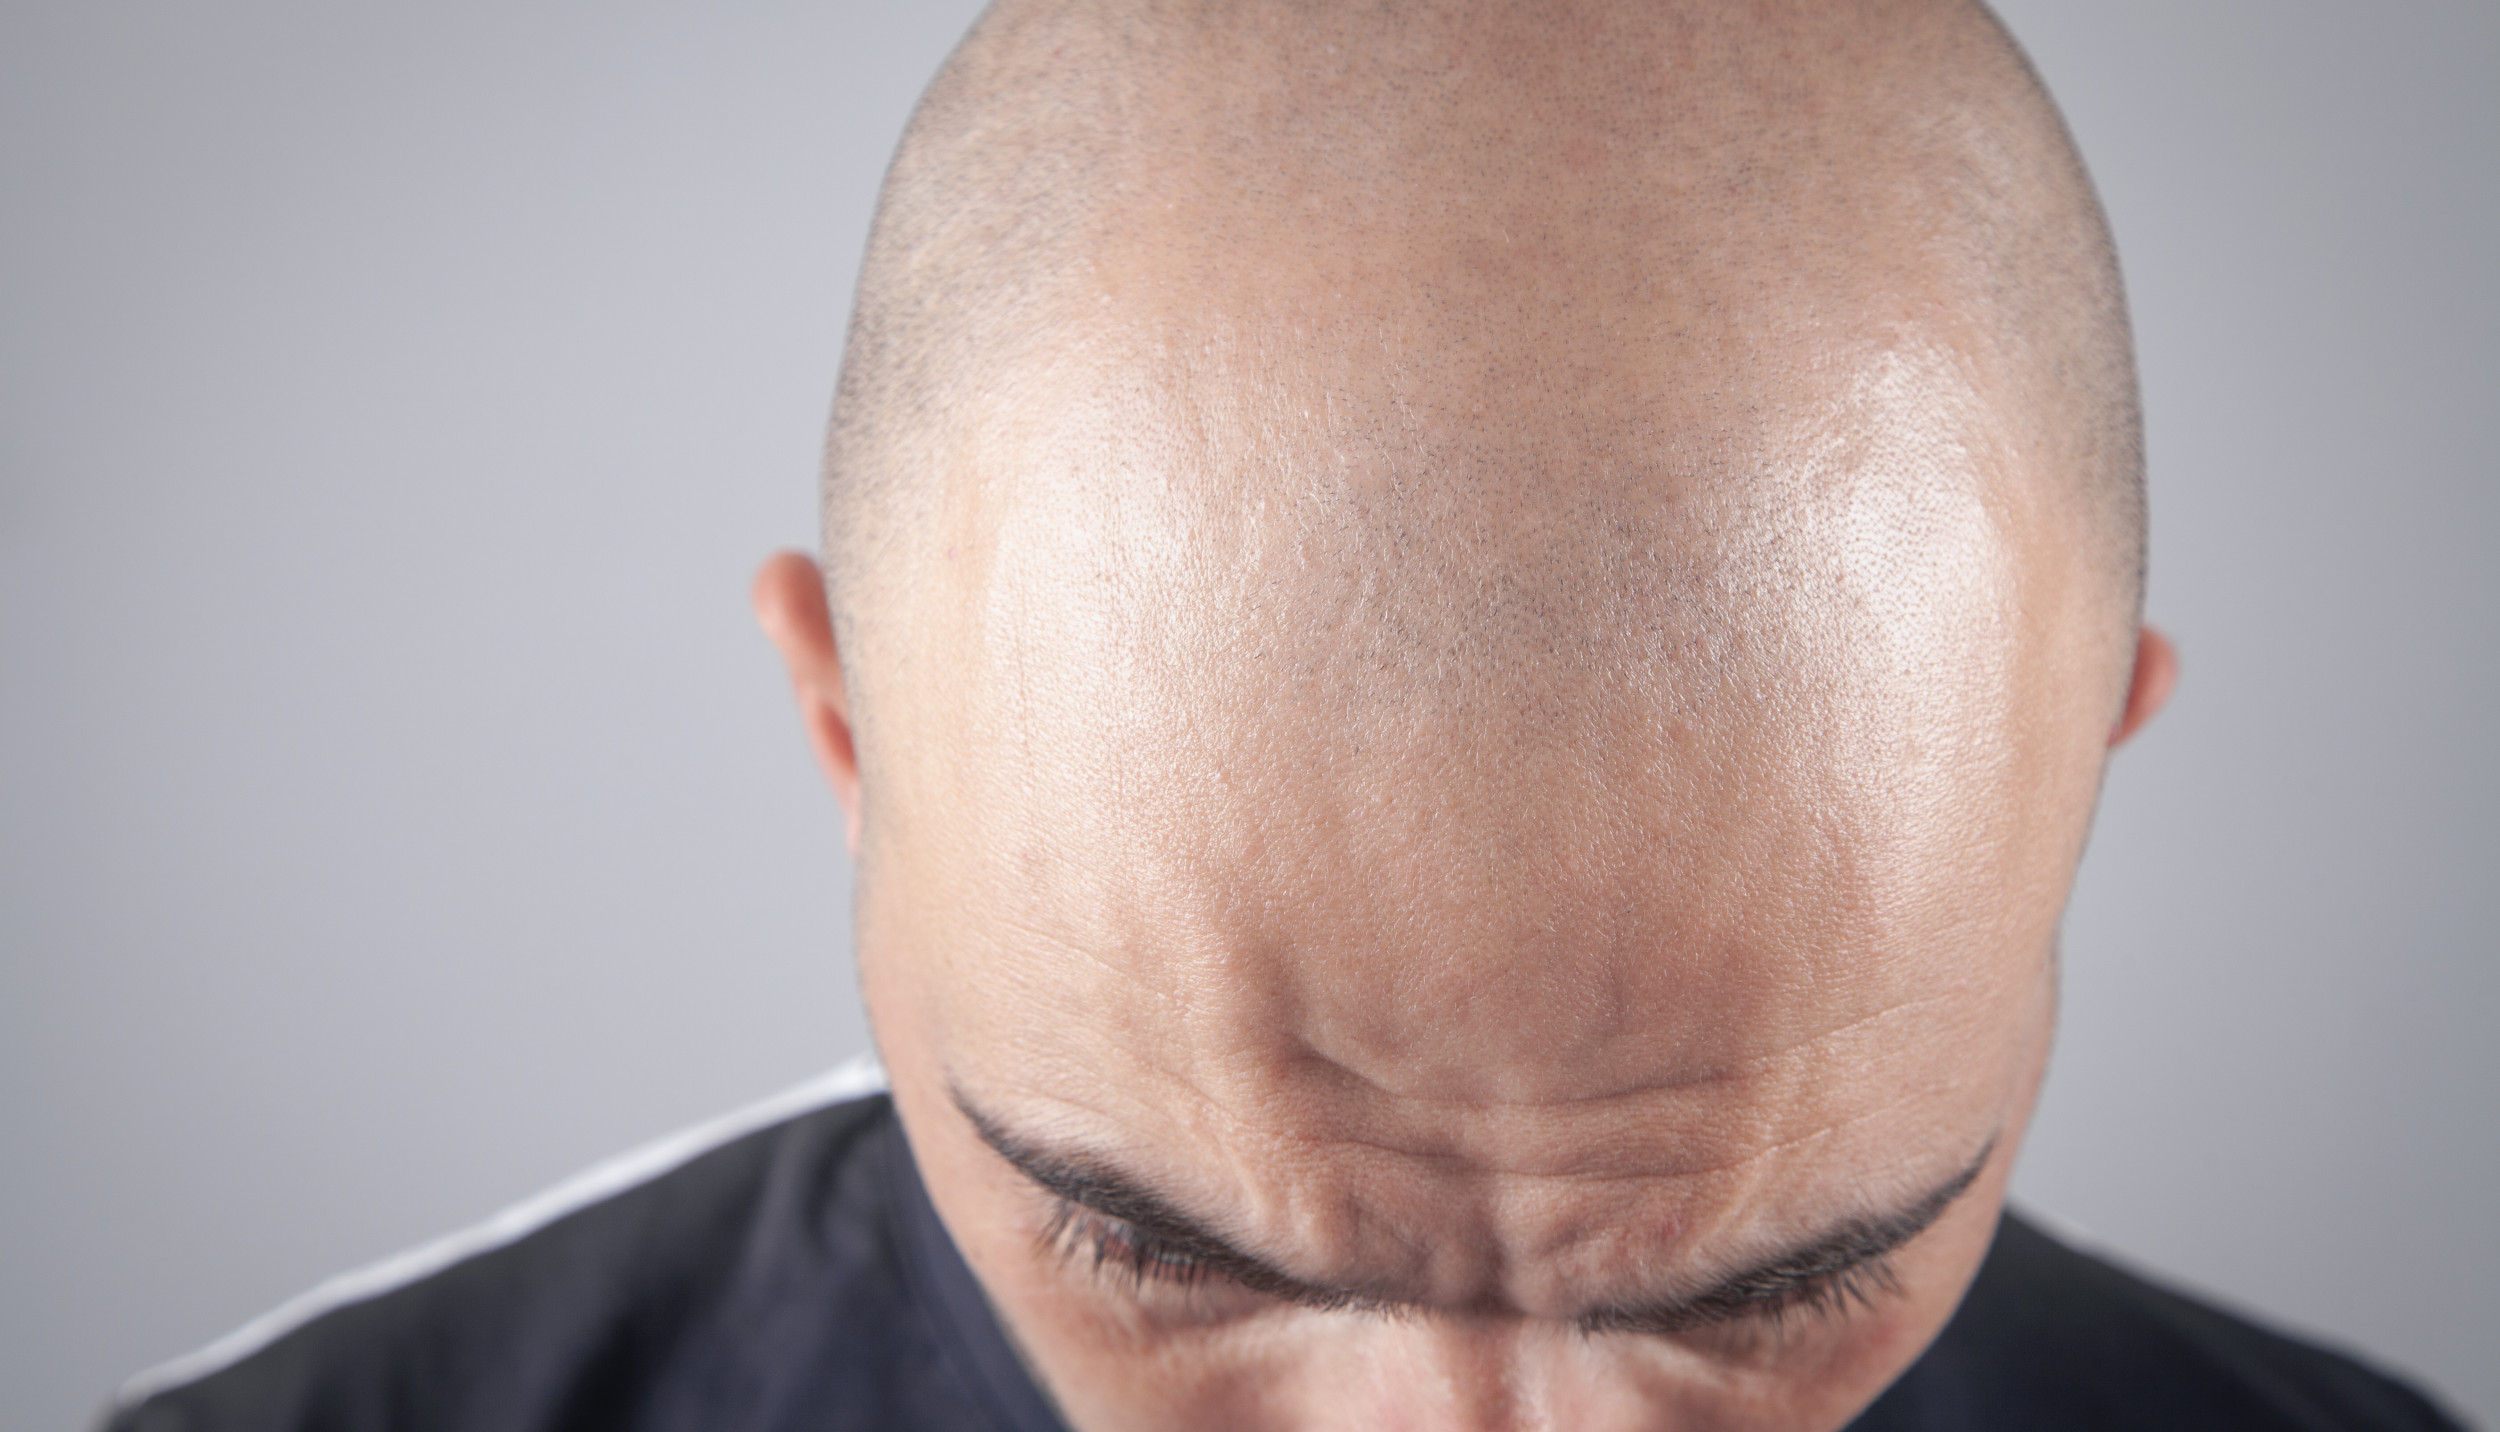 Aggregate more than 126 head without hair is called